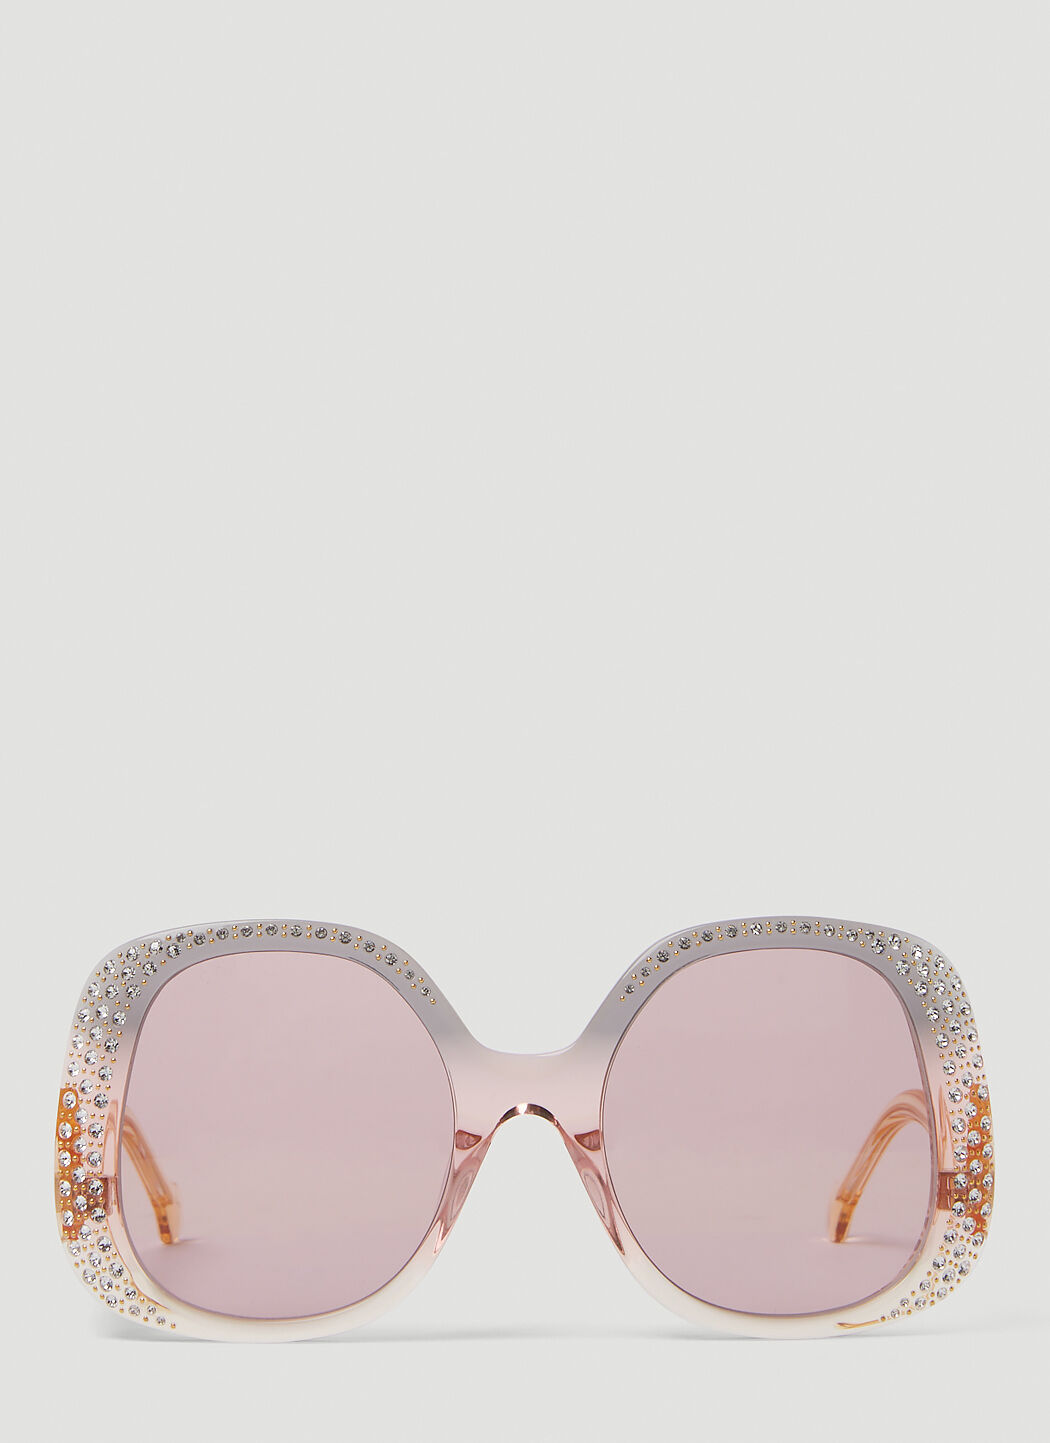 Gucci GG0772S 55mm Sunglasses in Pink | Lyst